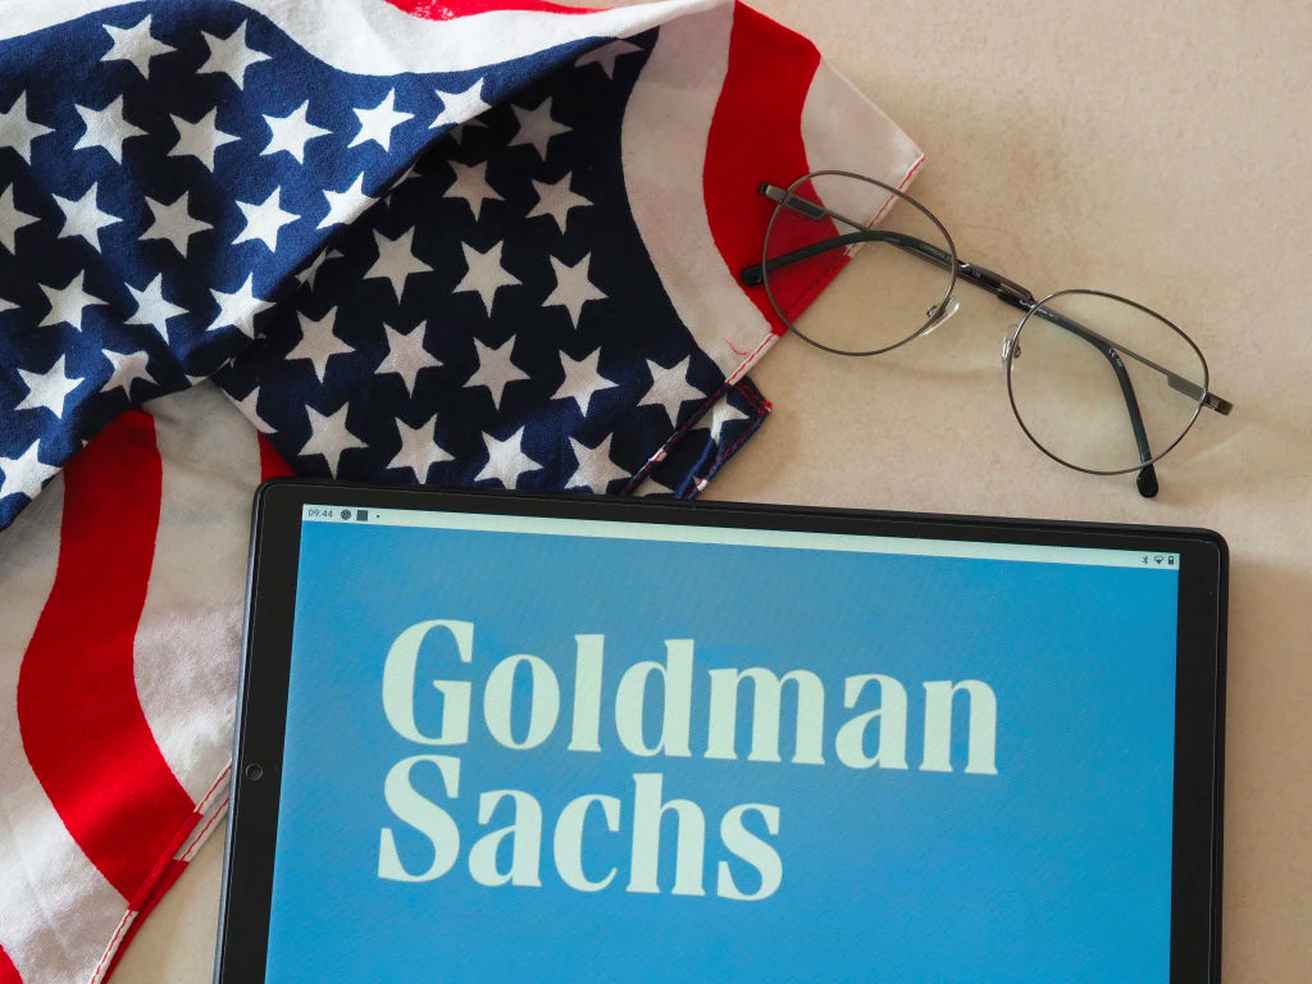 Goldman Sachs ready for hundreds more layoffs. Morgan Stanley cuts these bonuses by up to -50%.